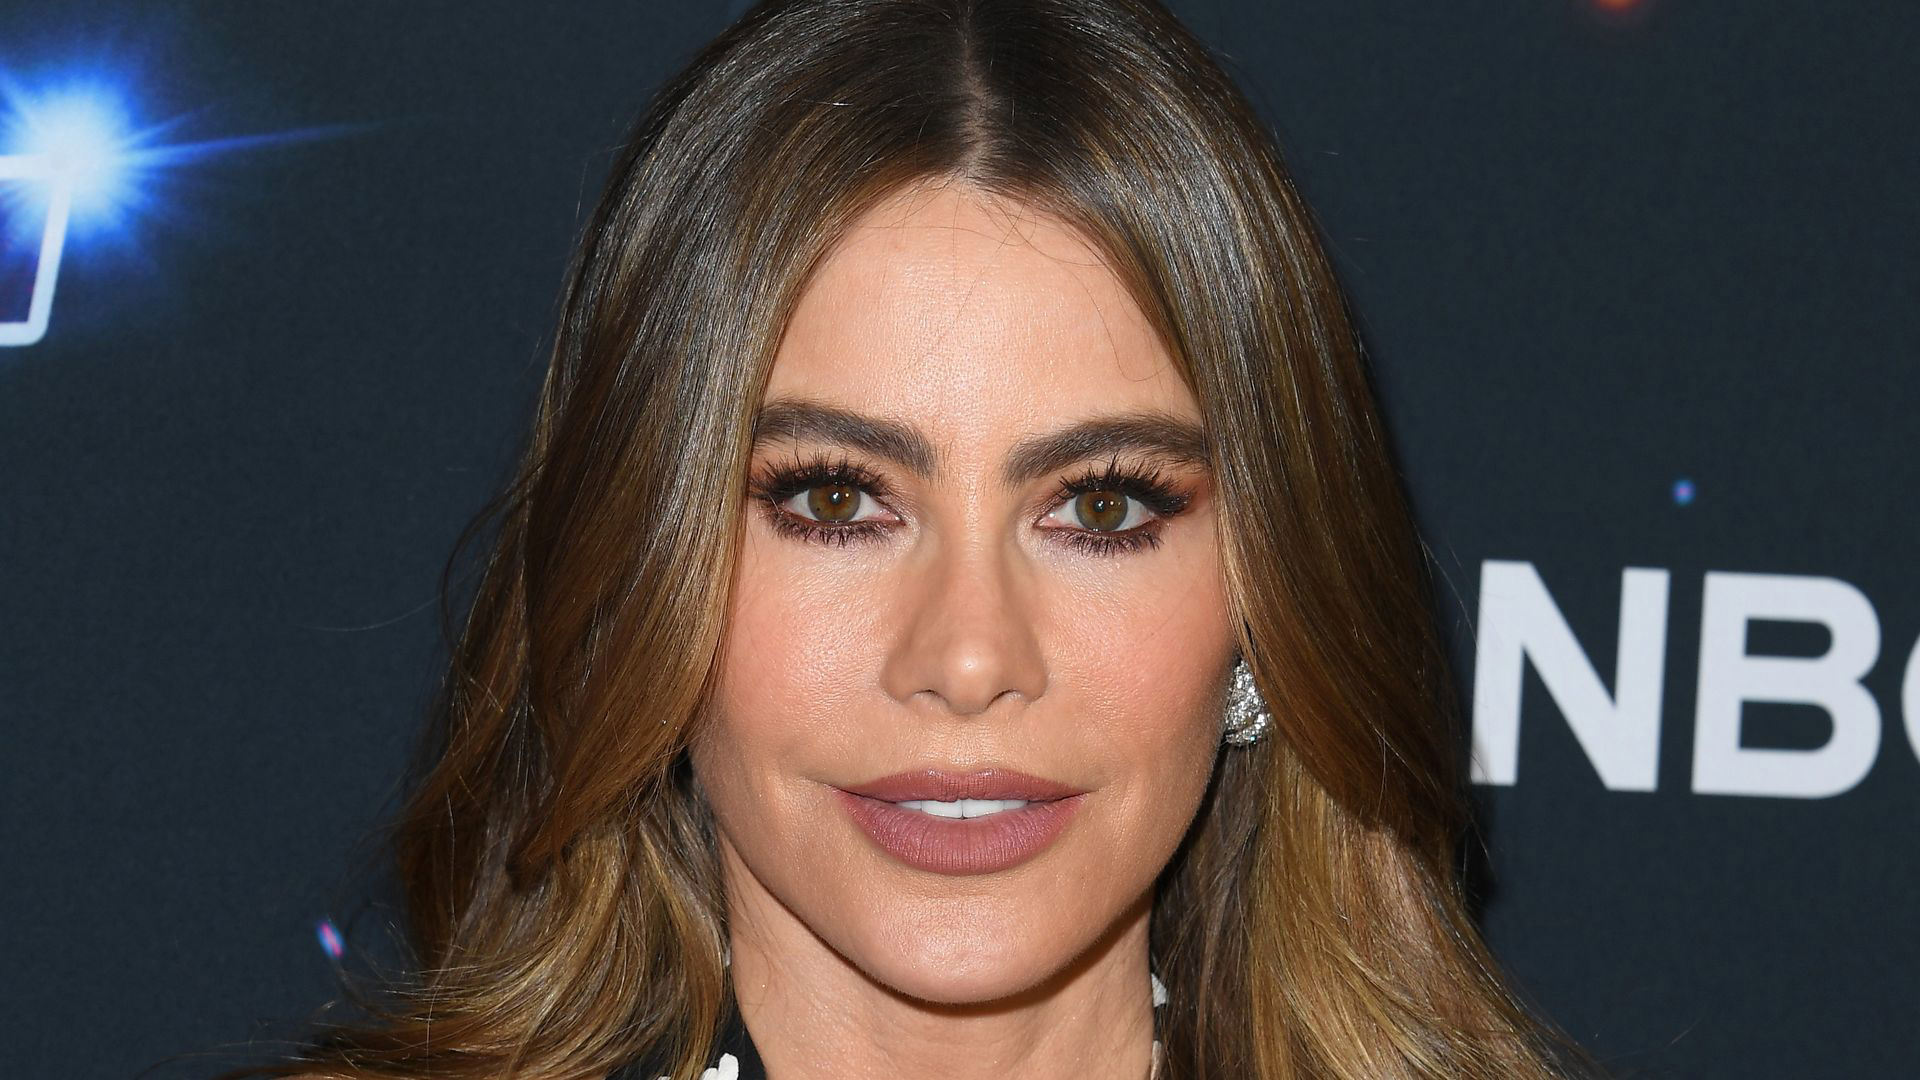 Sofia Vergara Shows Off Her Curves In Sheer Blouse And Lace Bralette